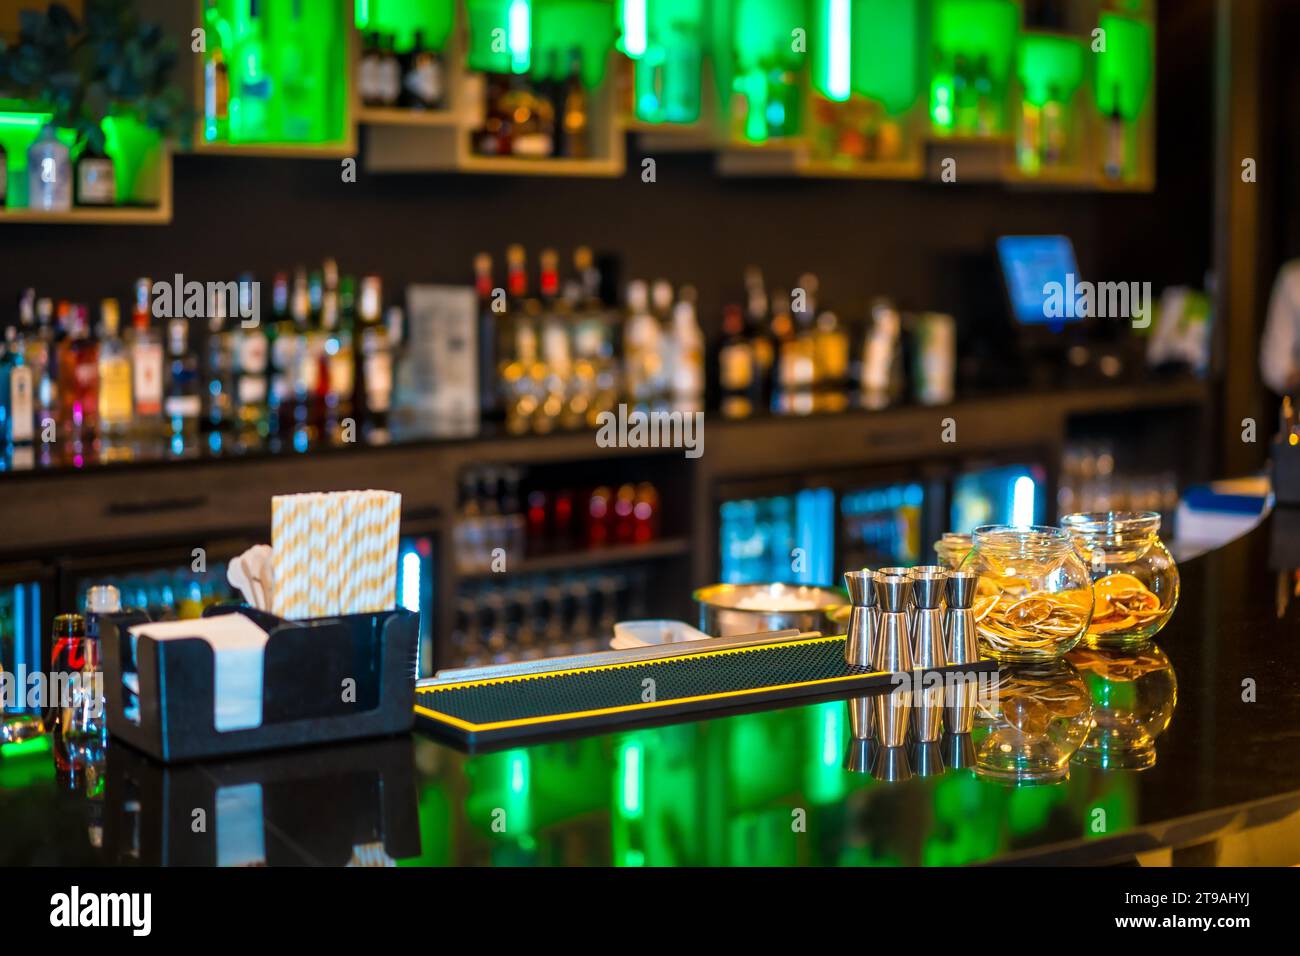 A luxury cocktail bar counter at night with no people Stock Photo